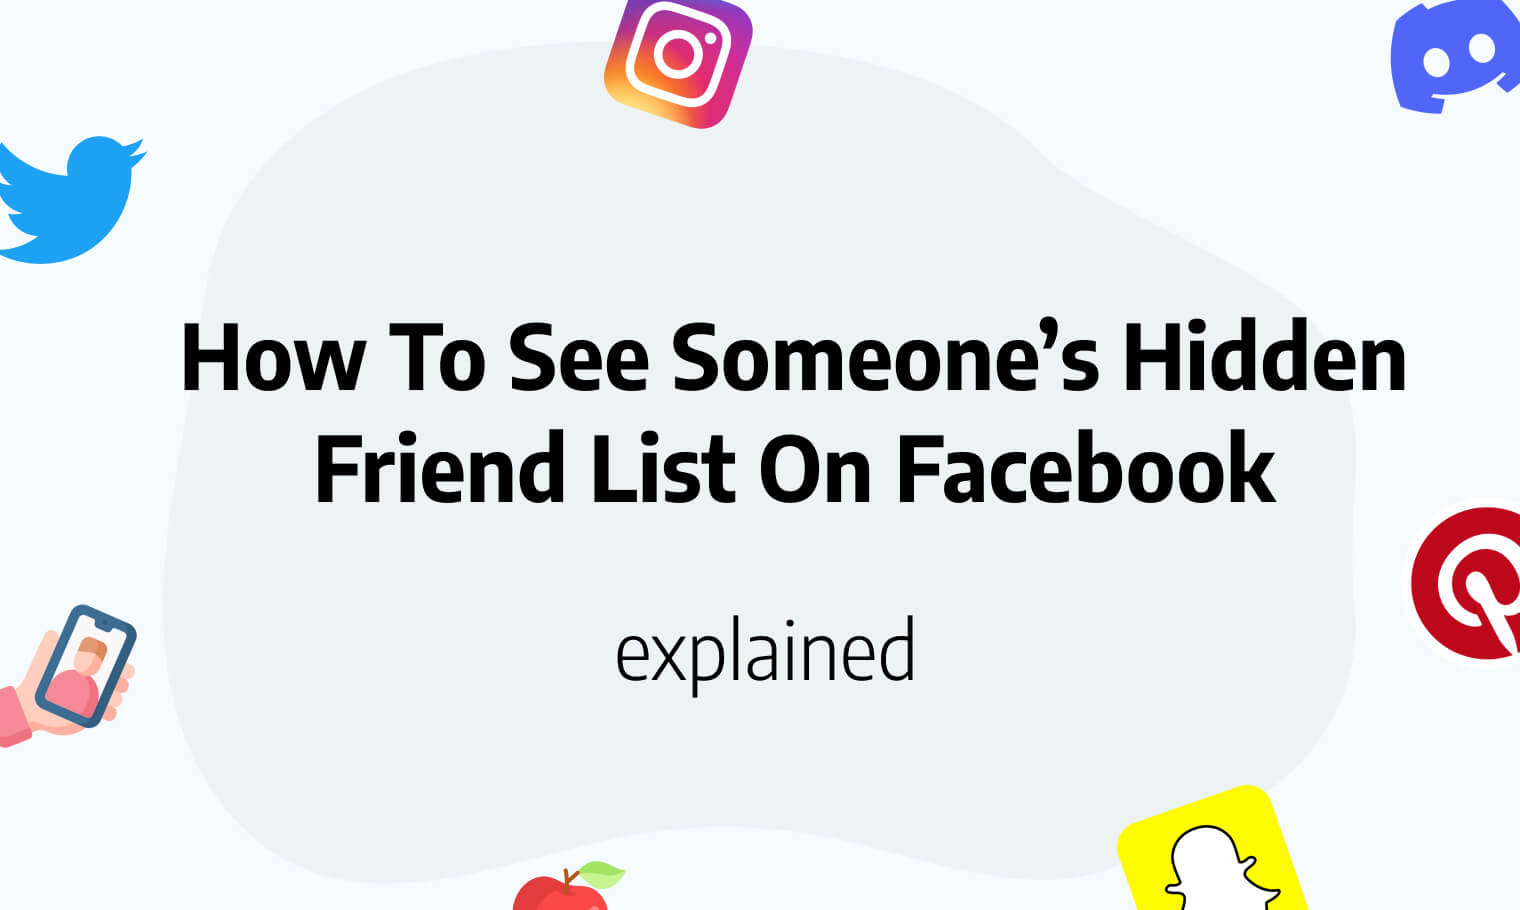 How To See Someone's Hidden Friend List On Facebook in 2023